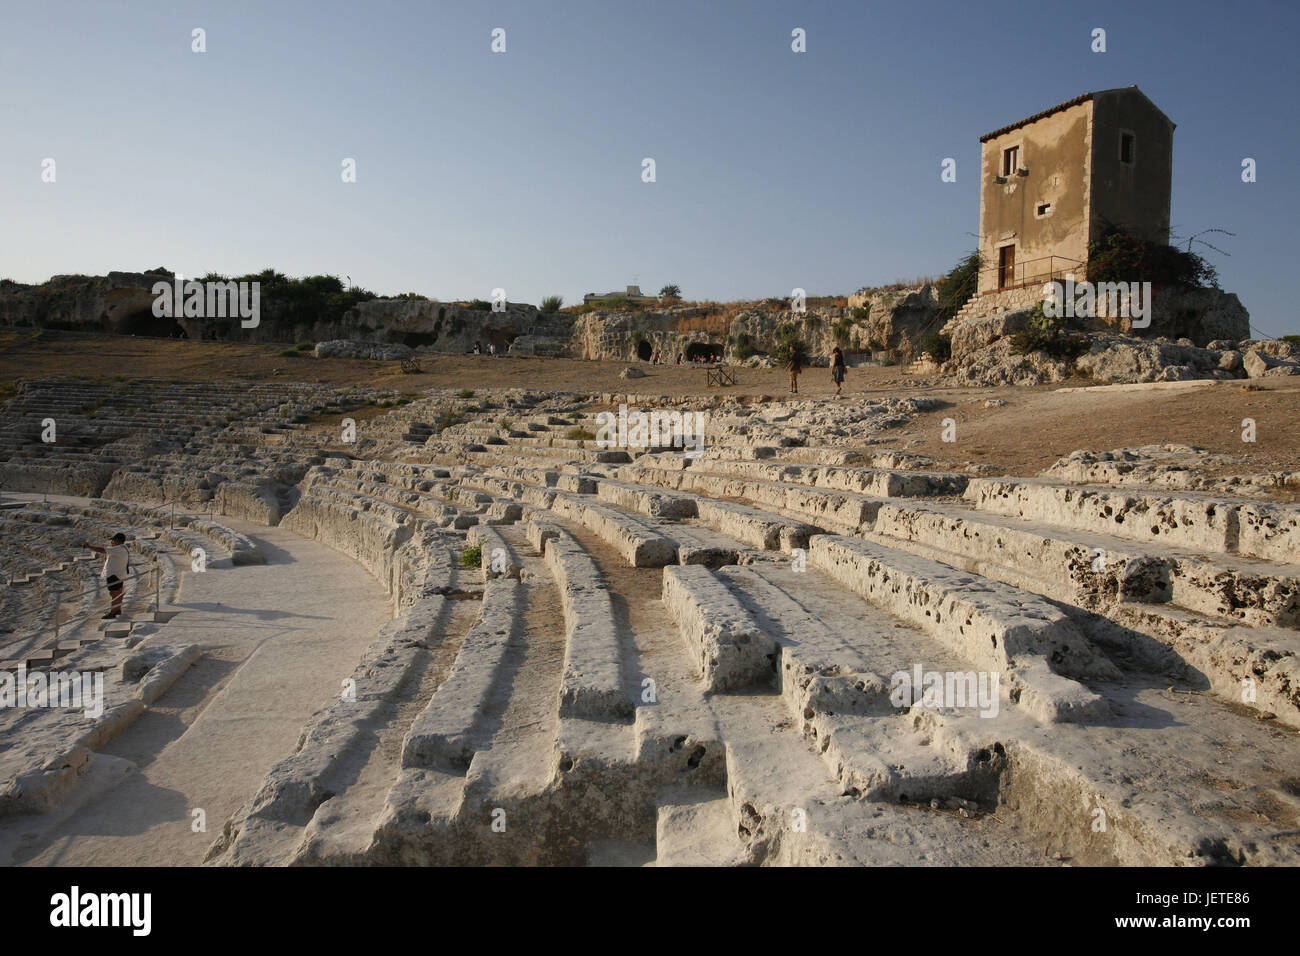 Italy, Sicily, island Ortygia, Syracuse, Teatro Greco, Southern Europe, Siracusa, game site, theatre, structure, antique, rows, place of interest, destination, tourism, theatrical festival, tourists, people, Stock Photo